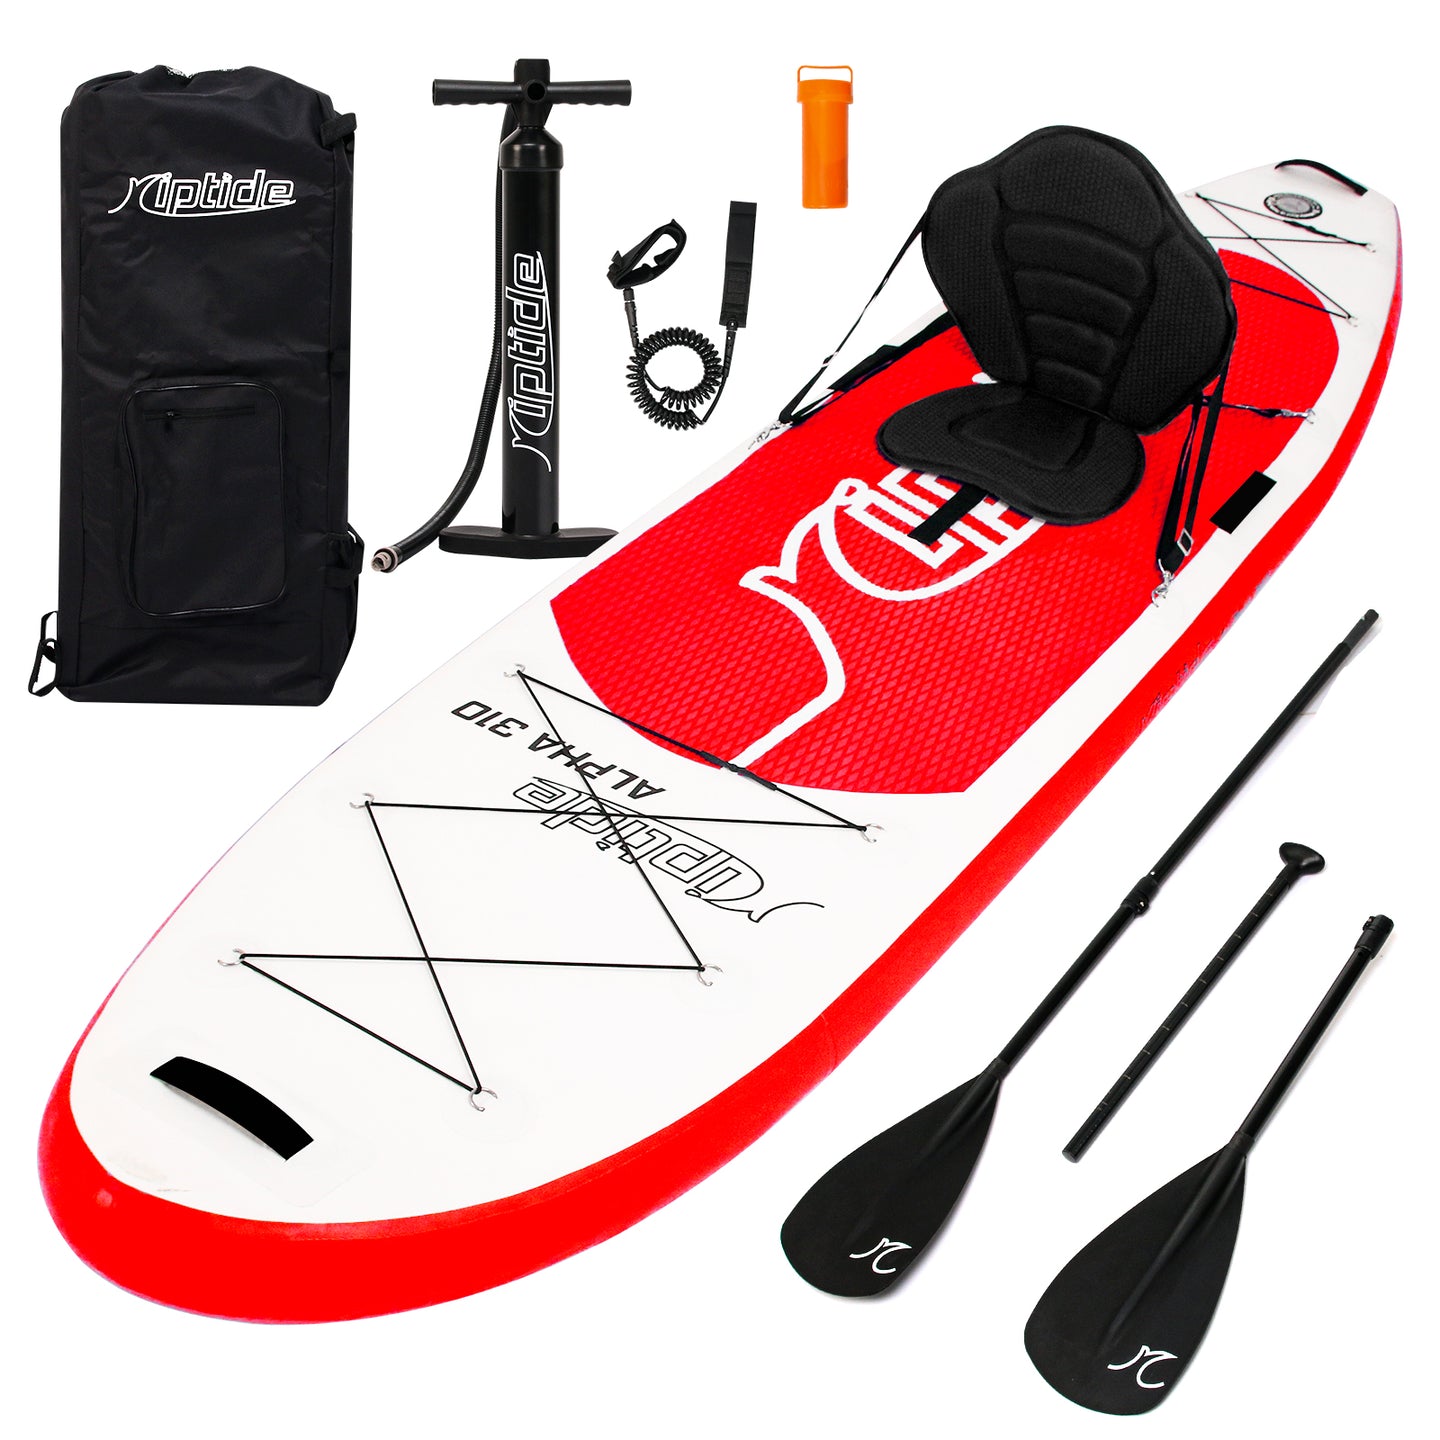 SUP Touring Board mit Sitz - Stand Up Paddle